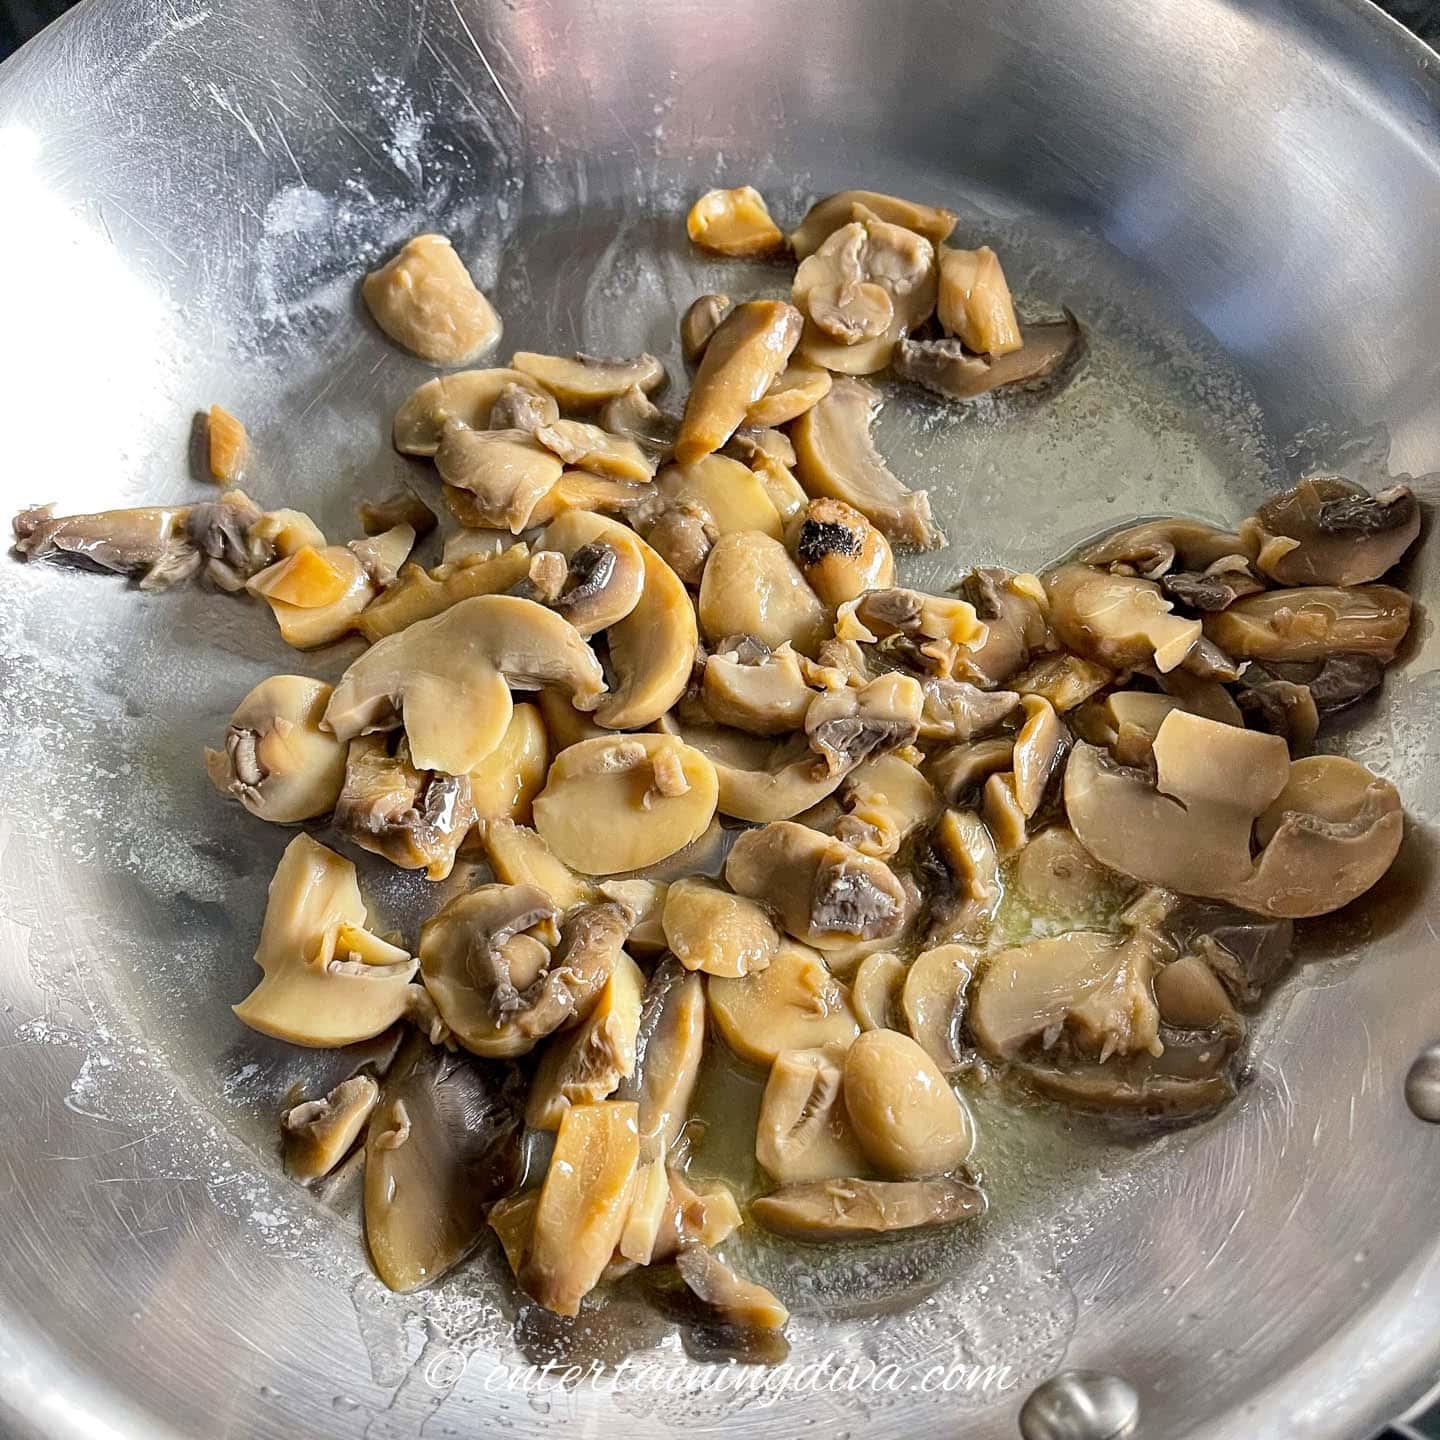 Mushrooms being sauteed in a frying pan